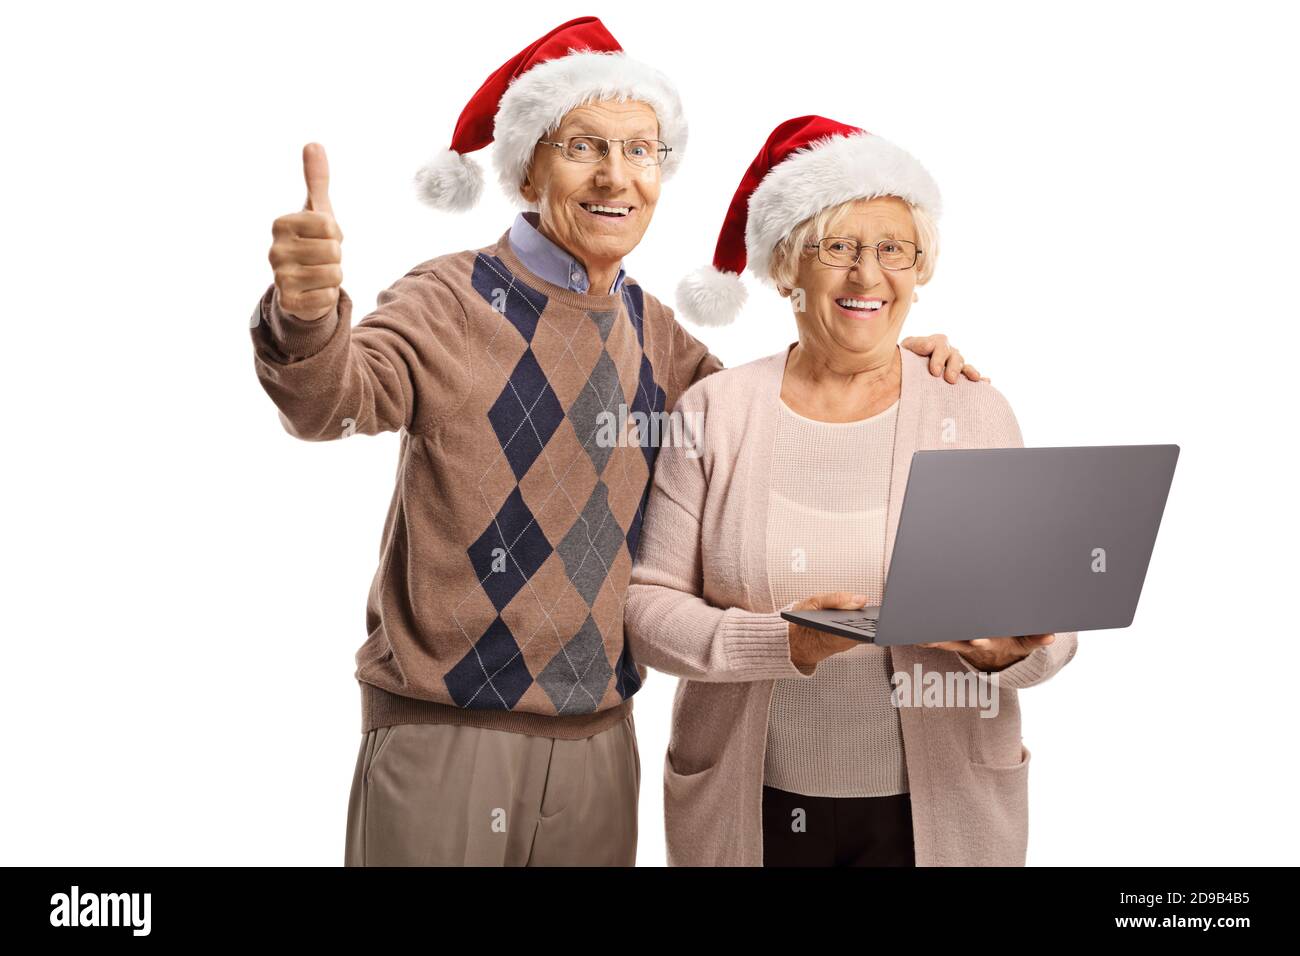 Elderly man showing thumb up and an elderly woman holding a laptop, both wearing christmas hats isolated on white background Stock Photo